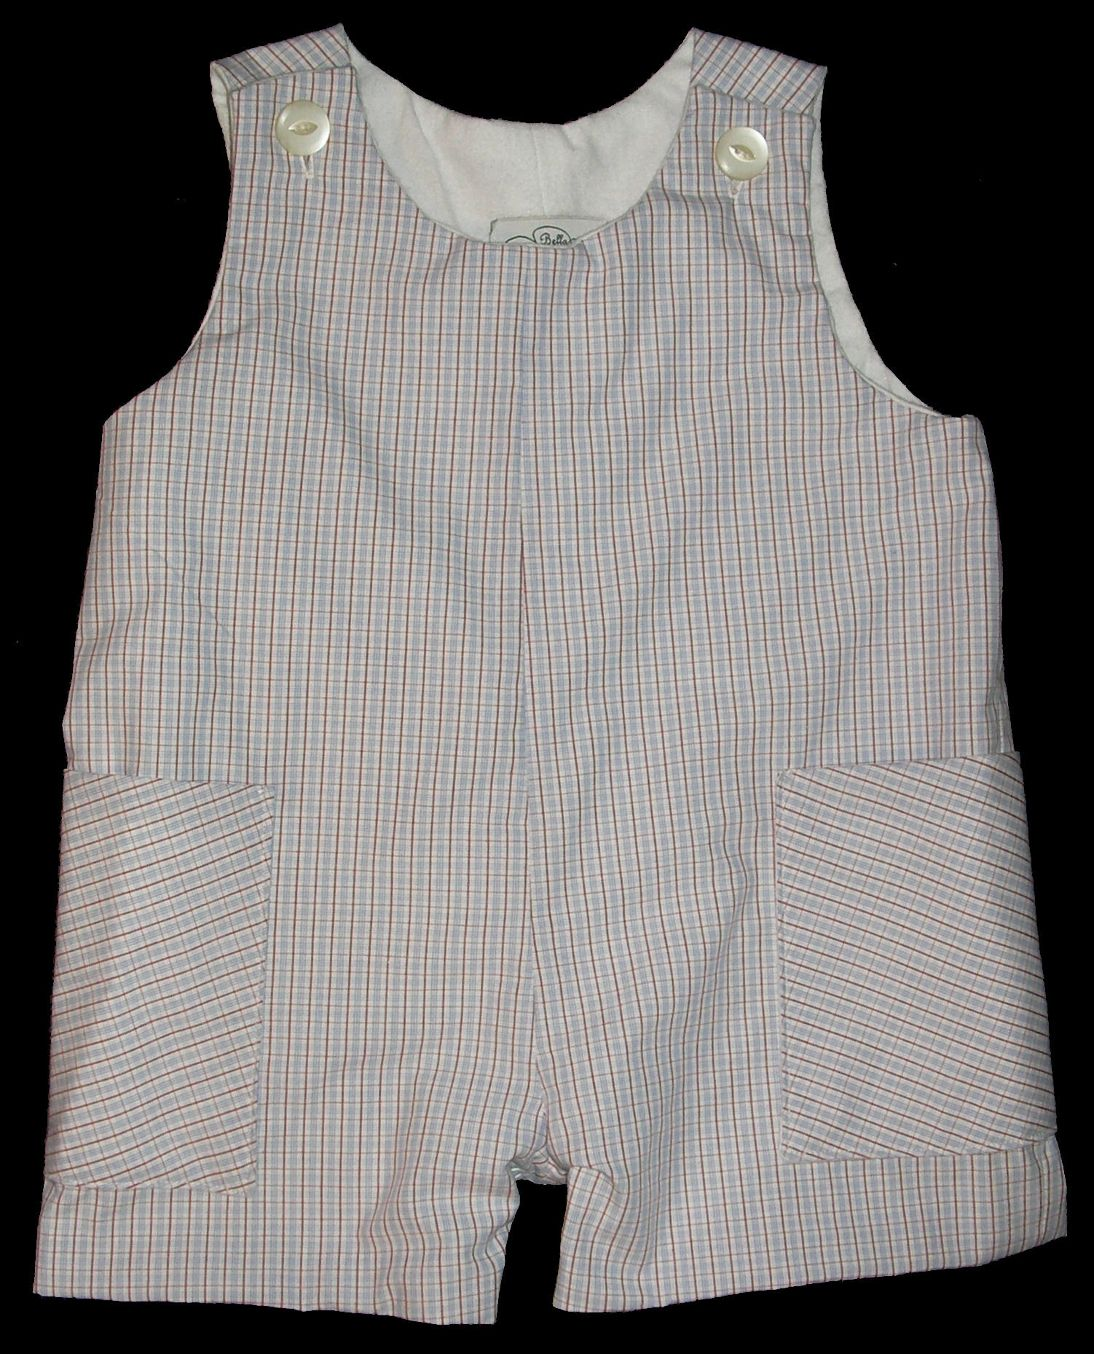 Boys Baby Short Romper - Flannel Lined _ FREE Shipping Sz1 to 3T